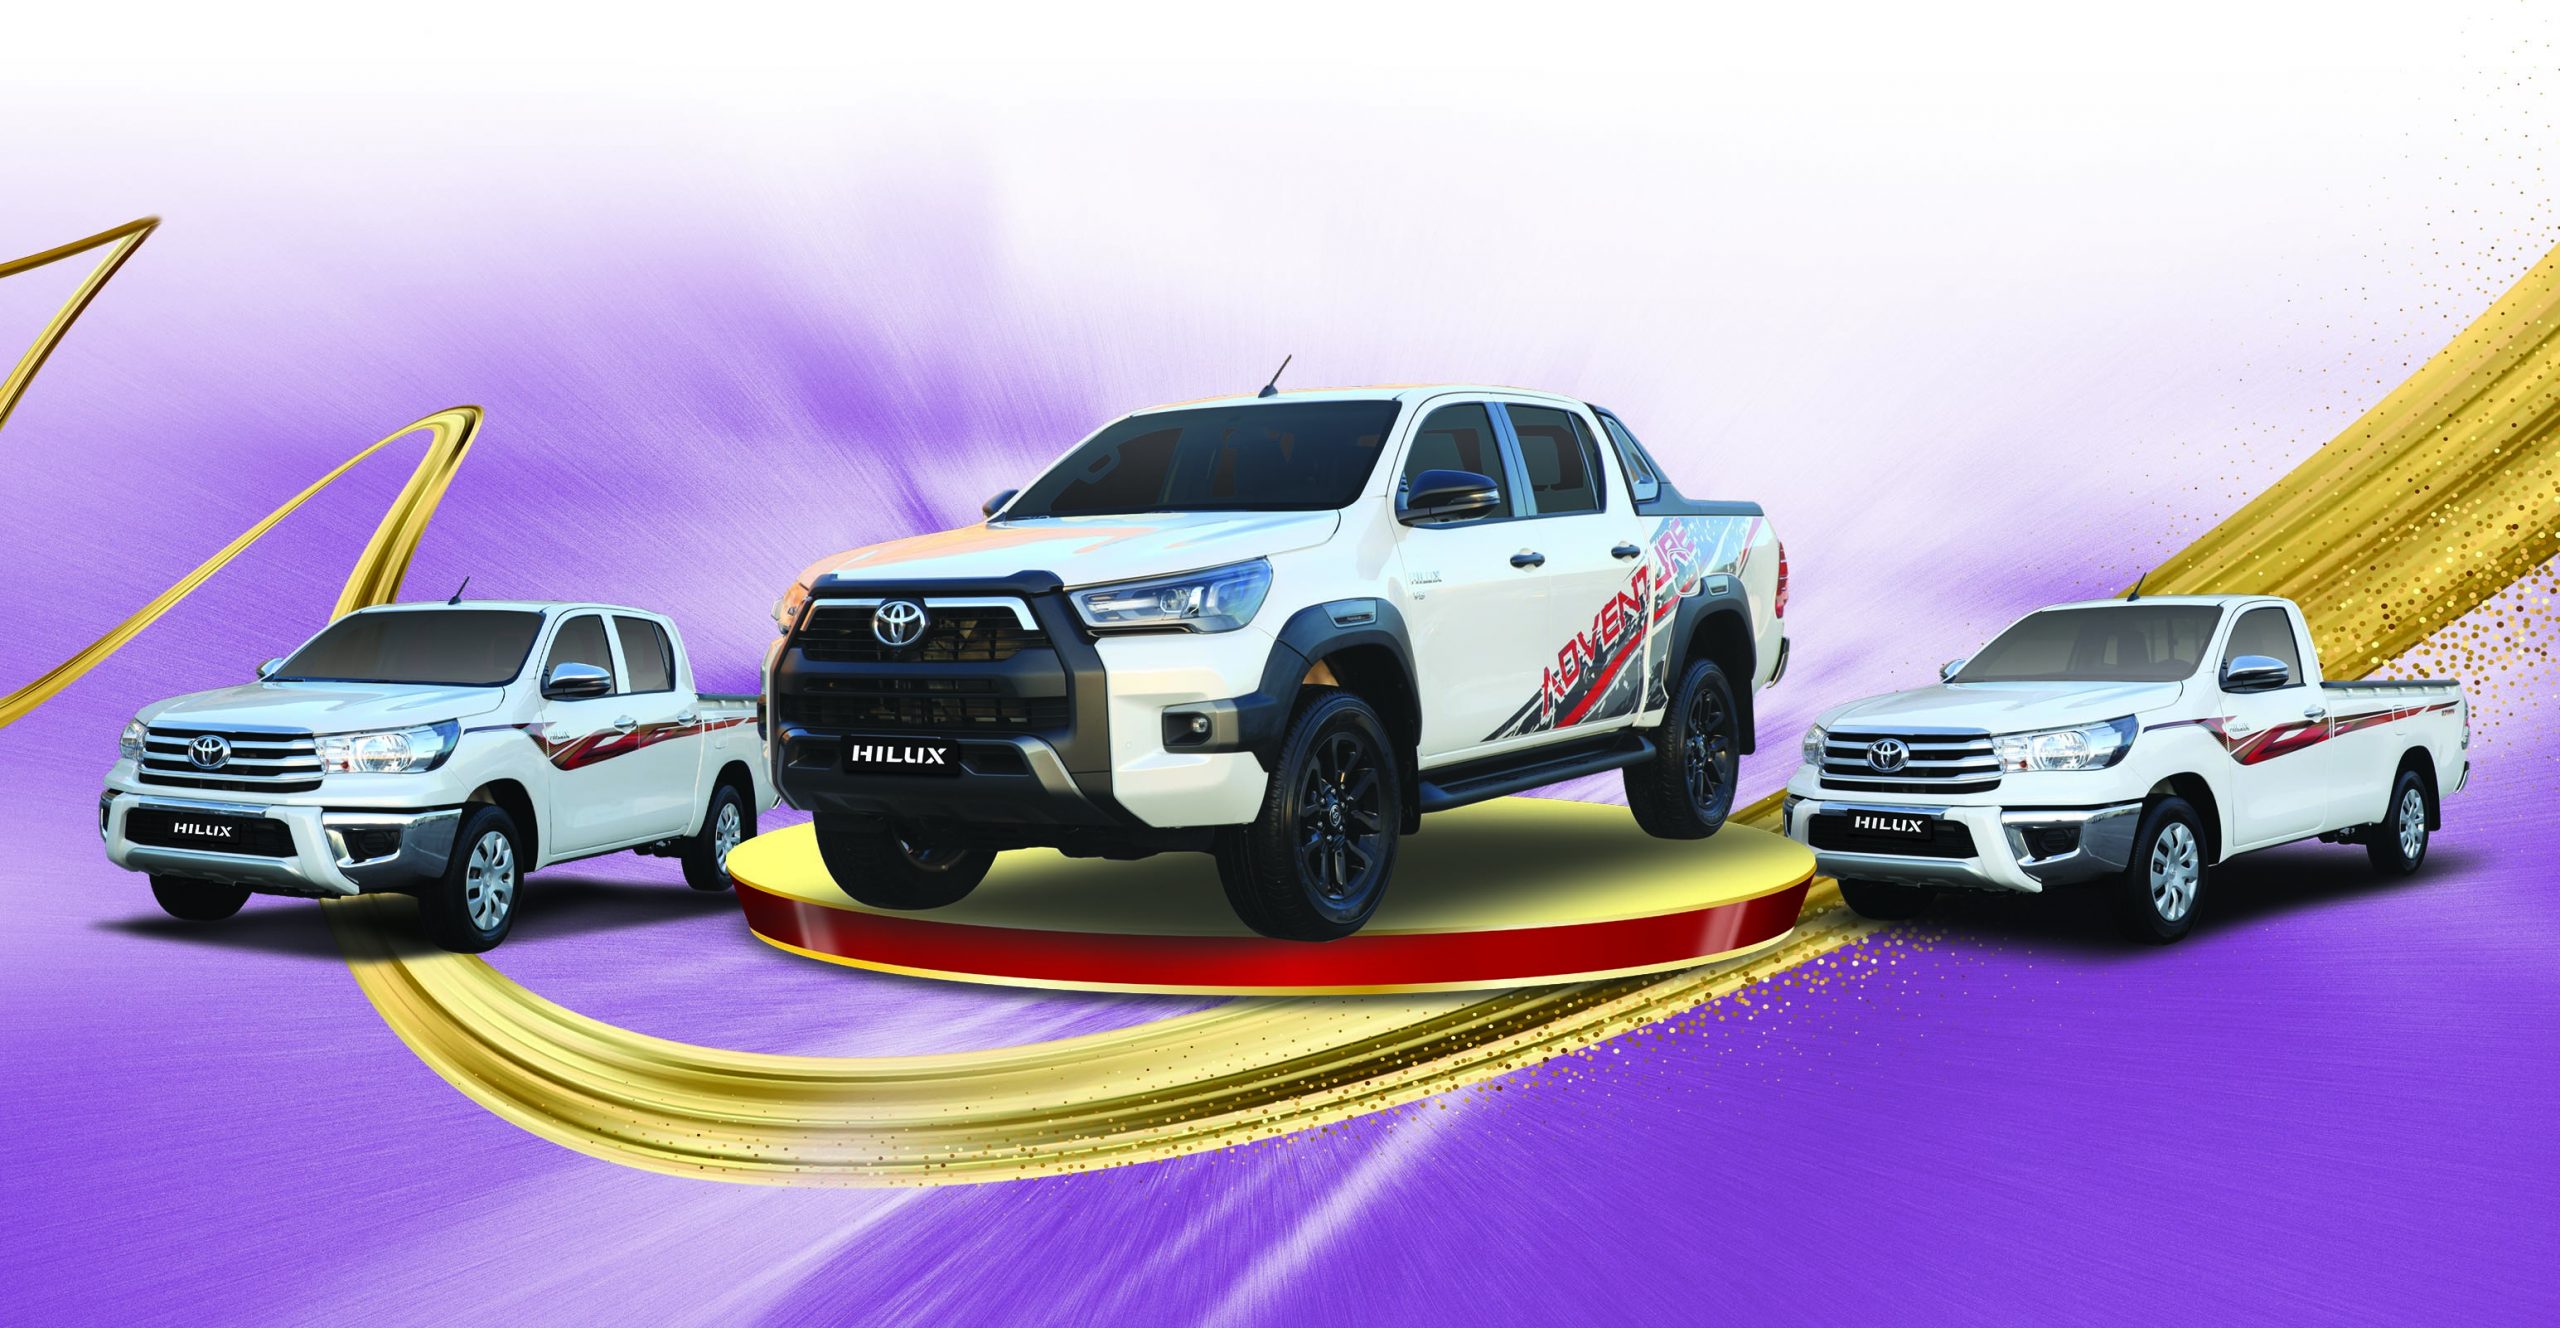 Toyota’s Inspiring Hilux With Toyota Oubess Benefits